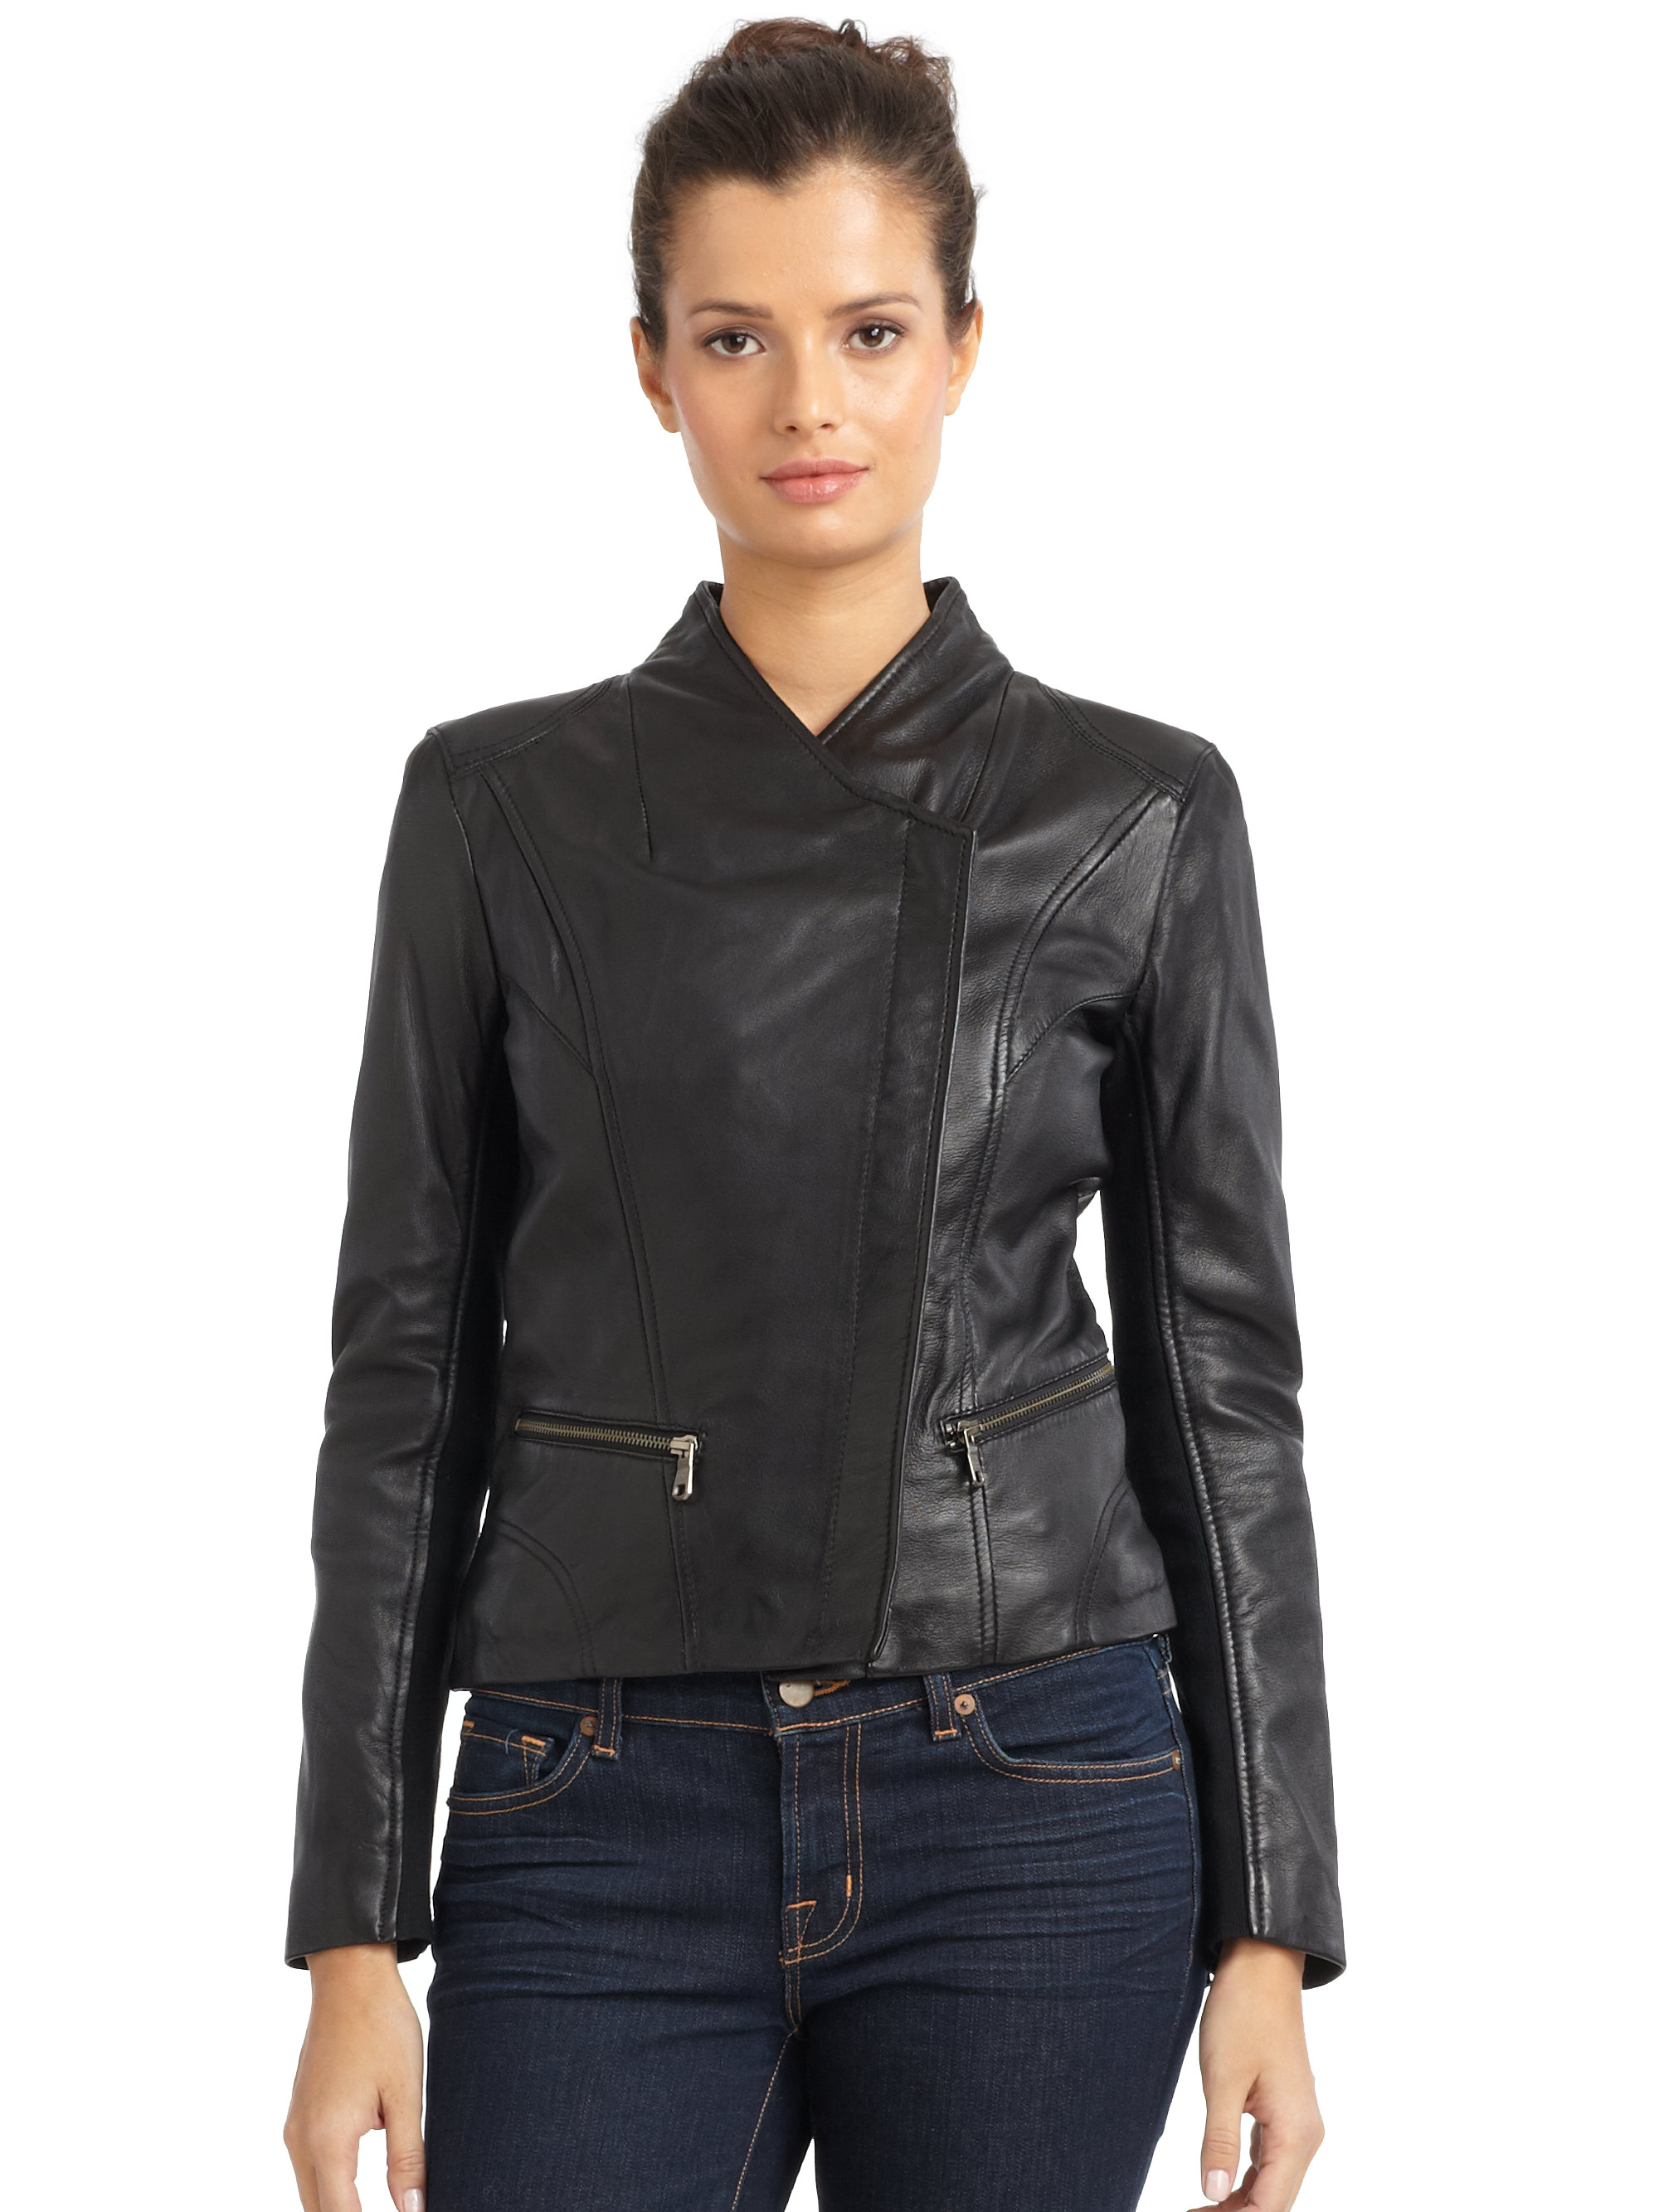 Lyst - Marc New York Tess Leather Jacket in Brown